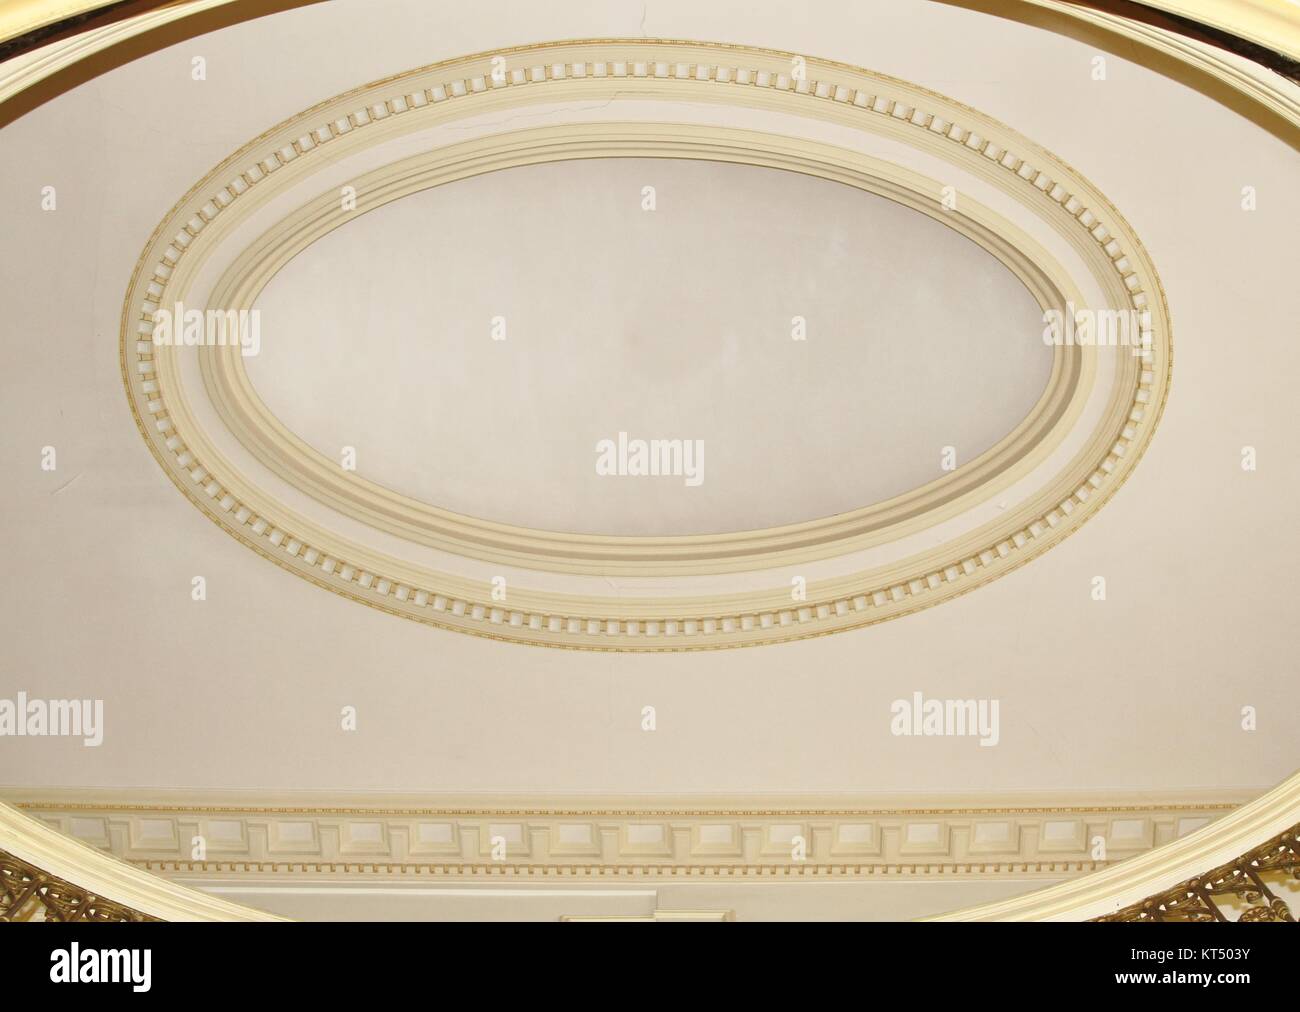 Elaborate oval gold design on ceiling Stock Photo